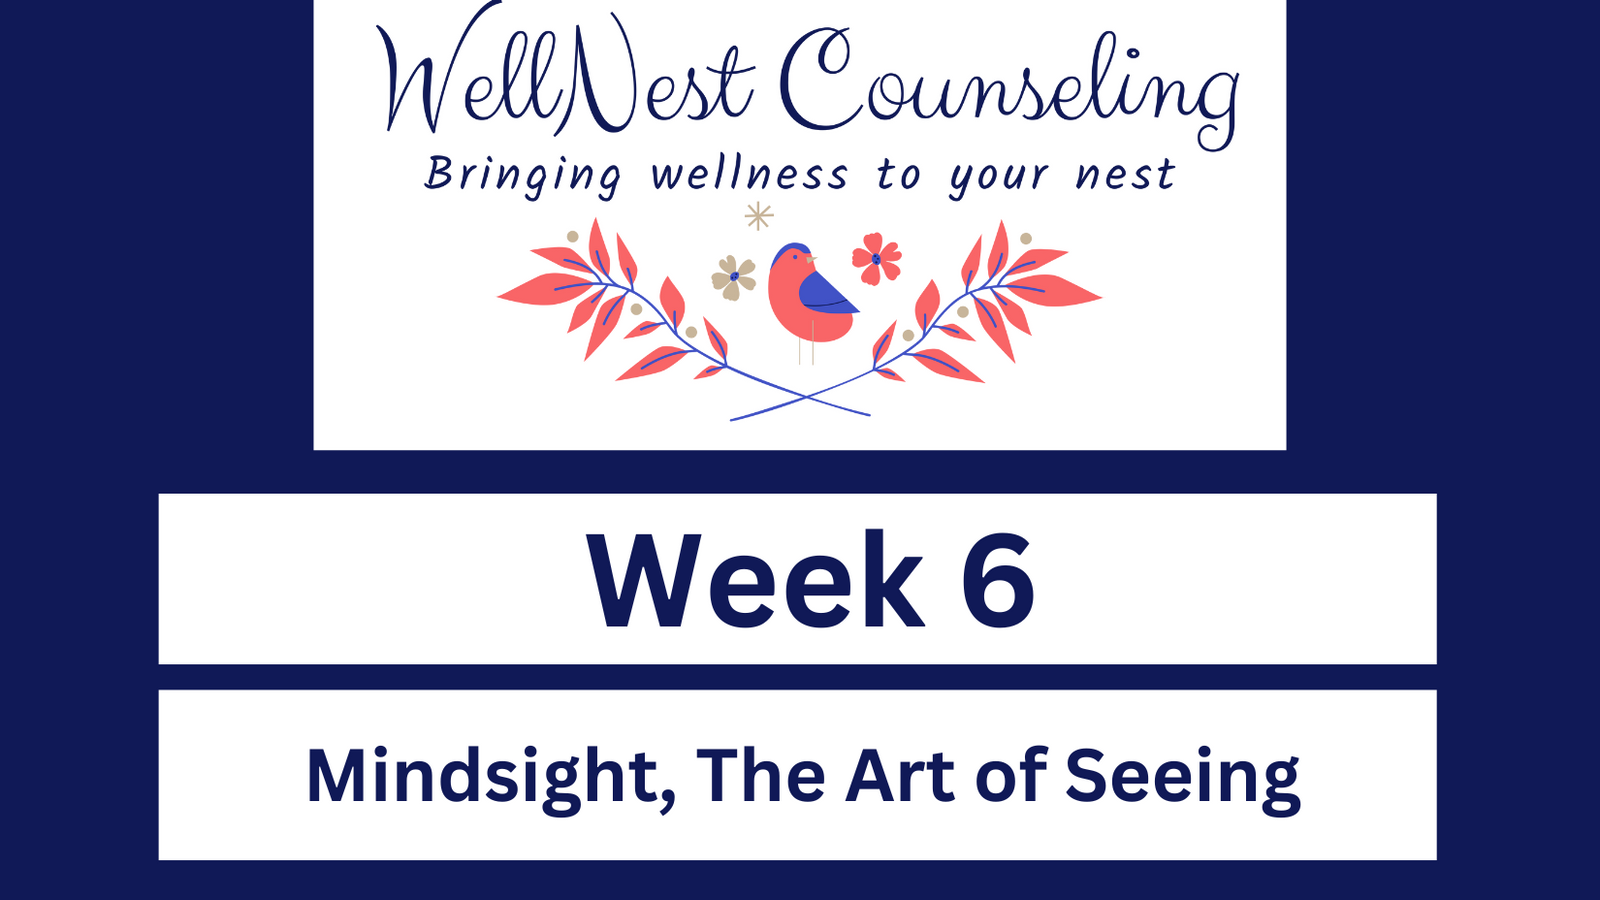 Week 6 Mindsight, The Art of Seeing